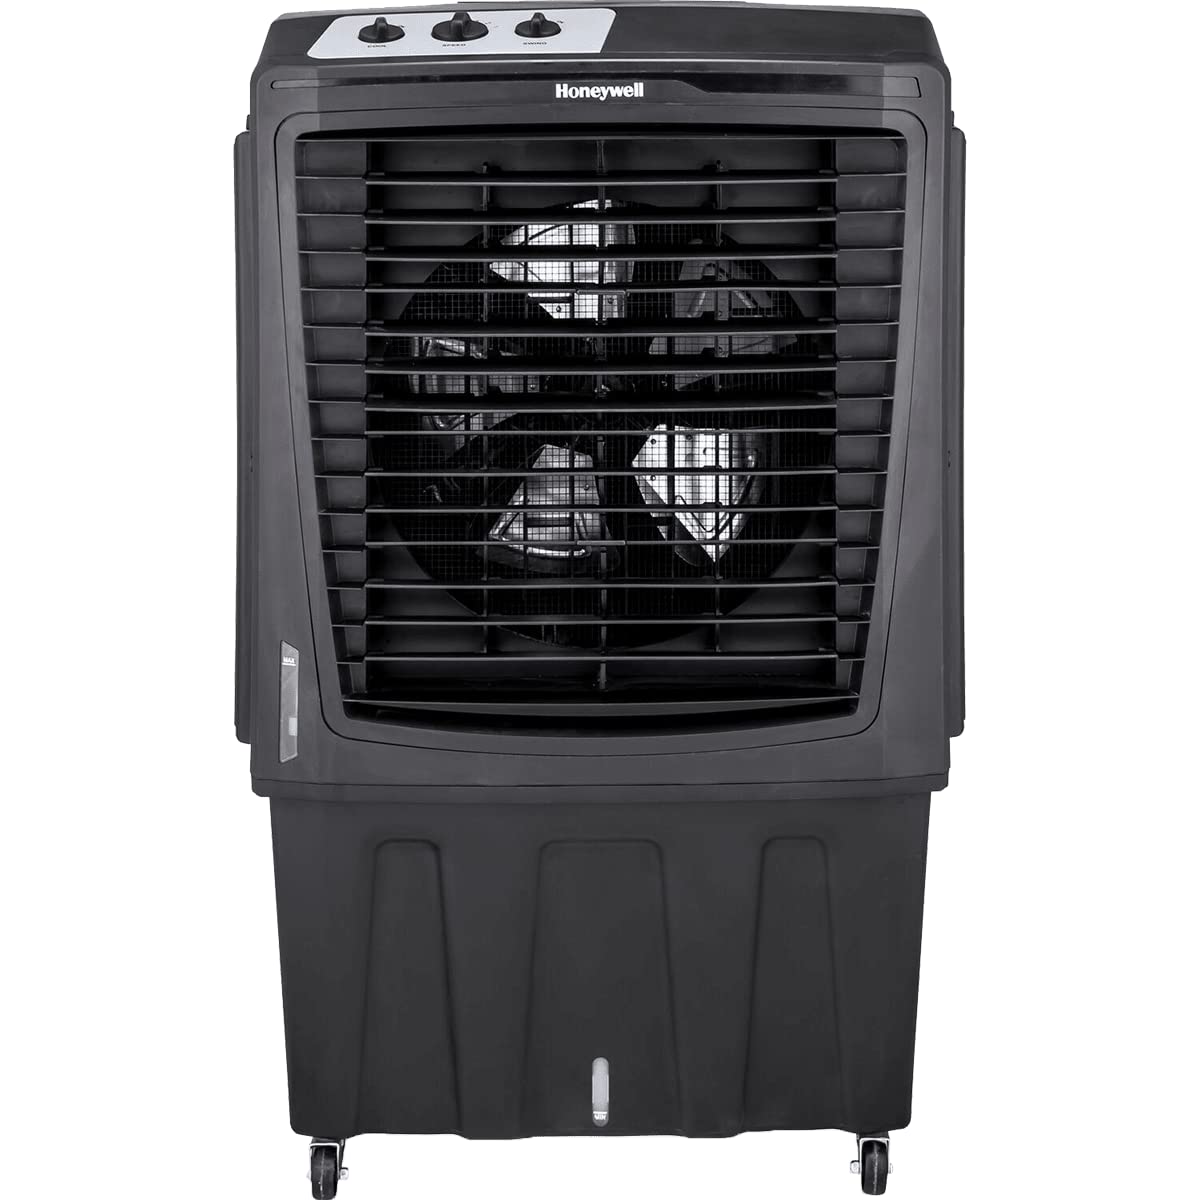 Honeywell 2777 CFM Outdoor Portable Evaporative Cooler & Fan, 33 Ft Air Throw for Large Outdoor Spaces, Black